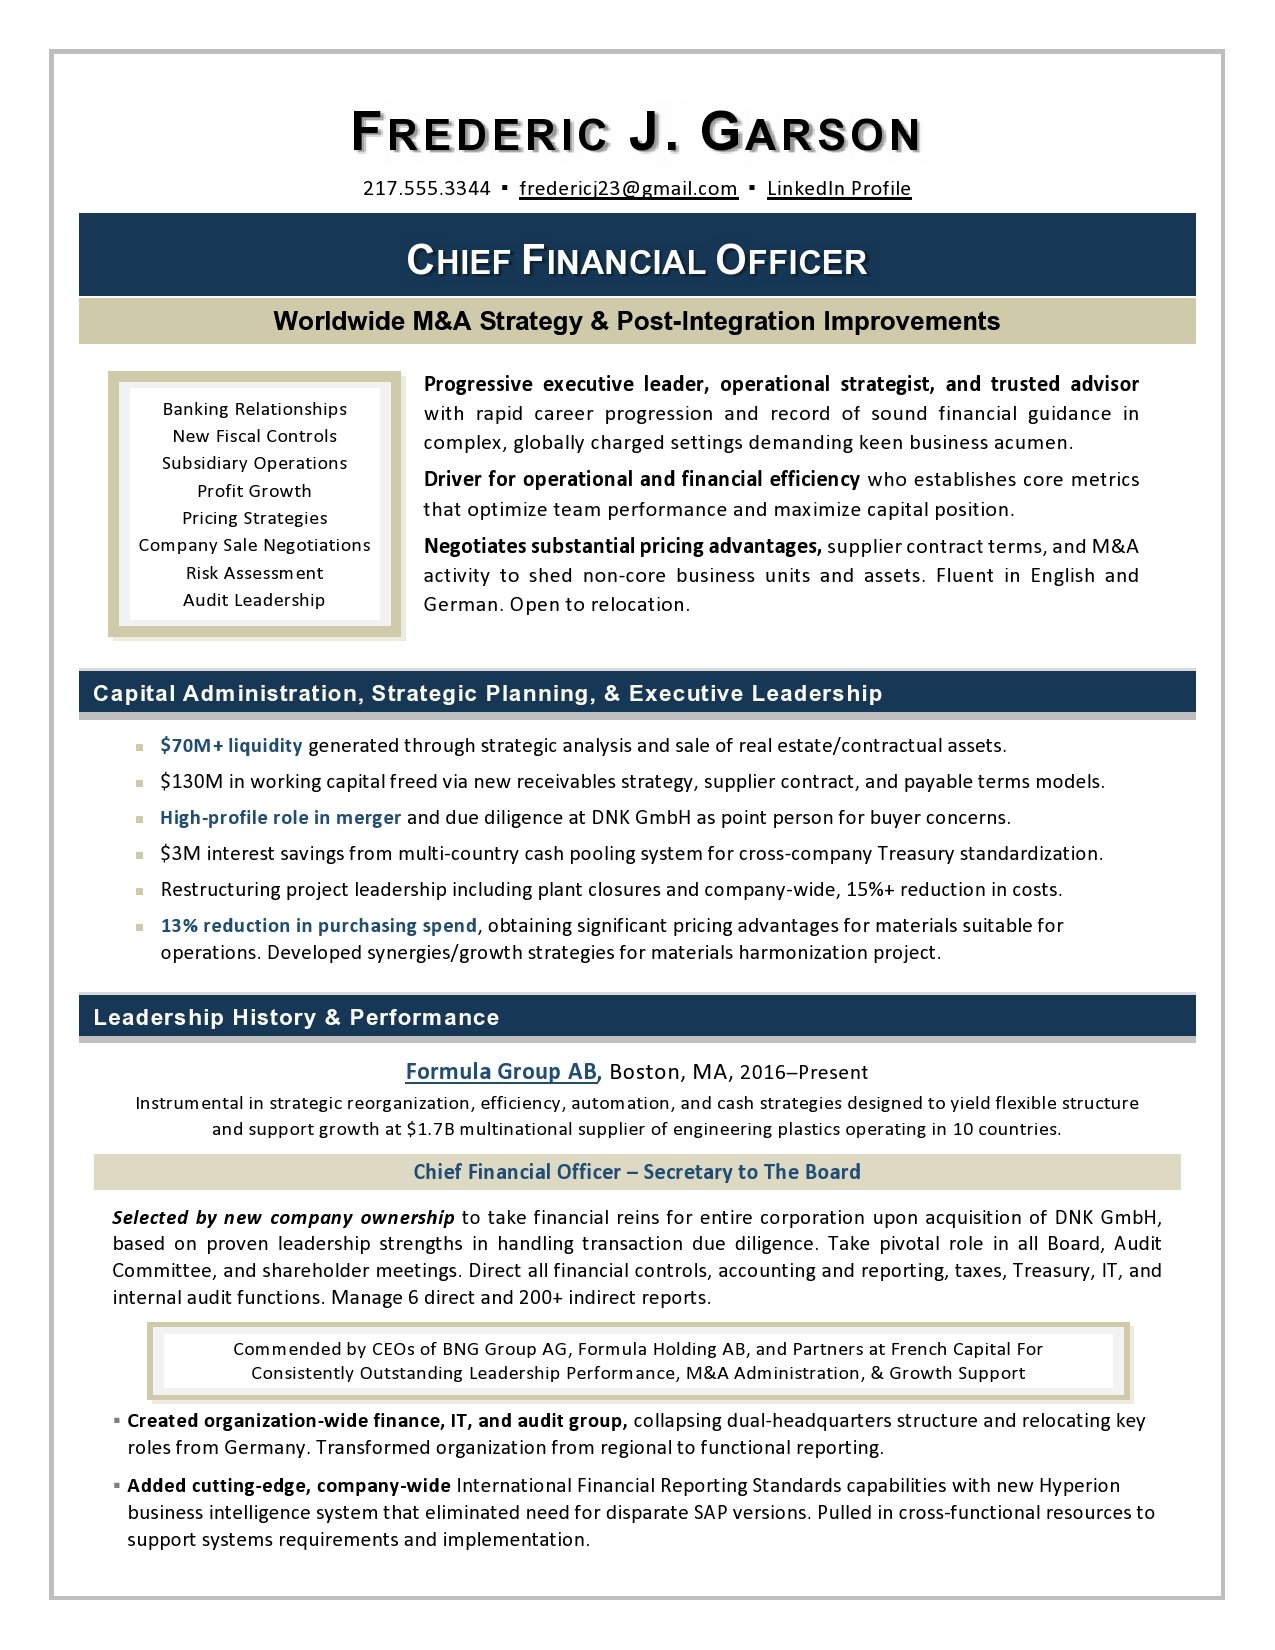 Resume Writer for CFOs. Executive Resume Service for CFO Candidates